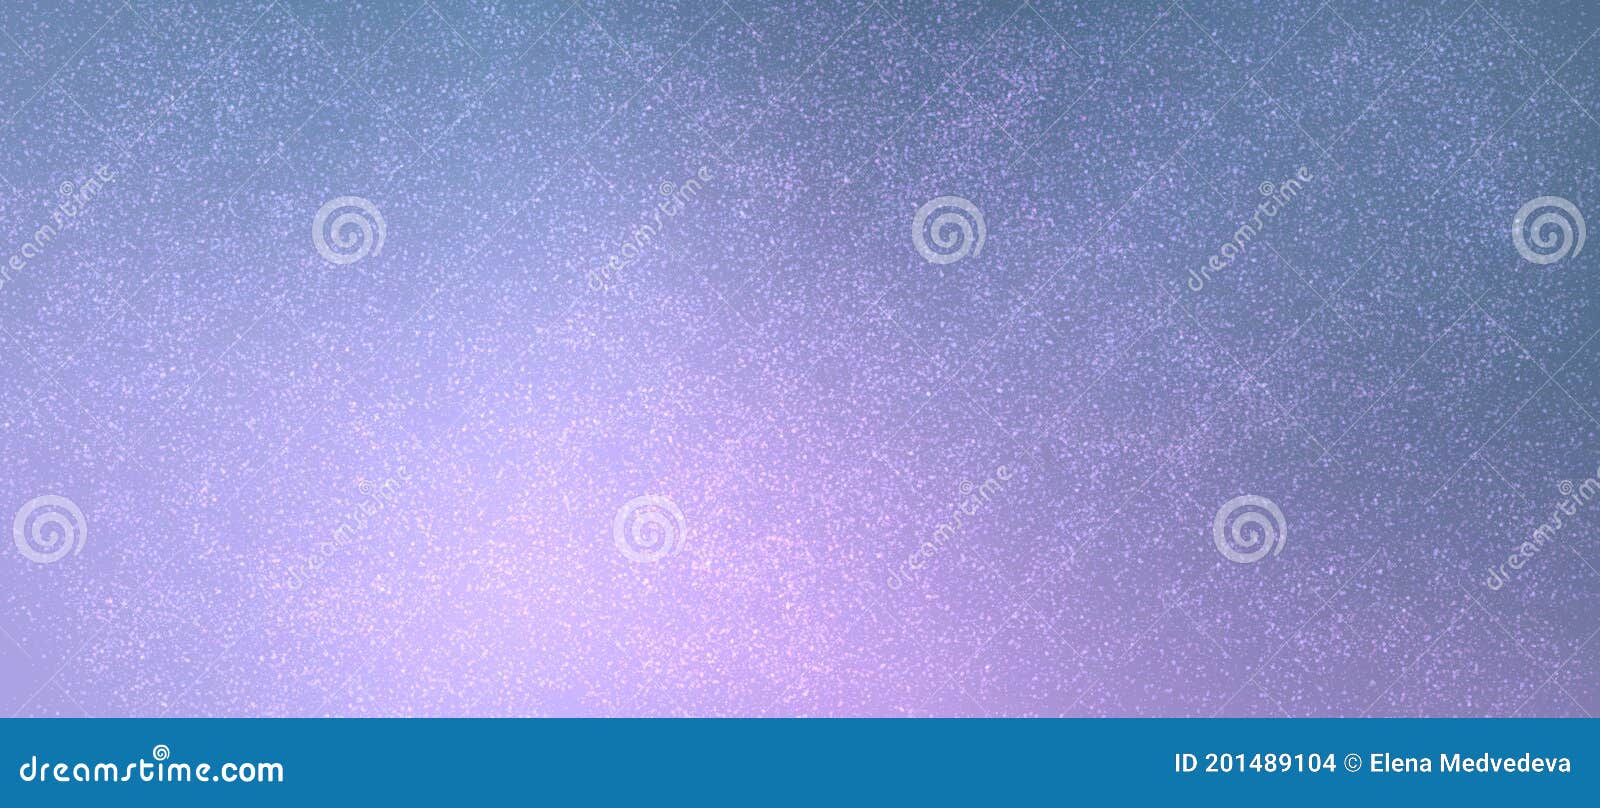 Purple Blue Delicate Cute Nice Plain Simple Background with Small Dots,  Graininess, Lightness and Fabulous Effect Stock Photo - Image of banners,  effect: 201489104